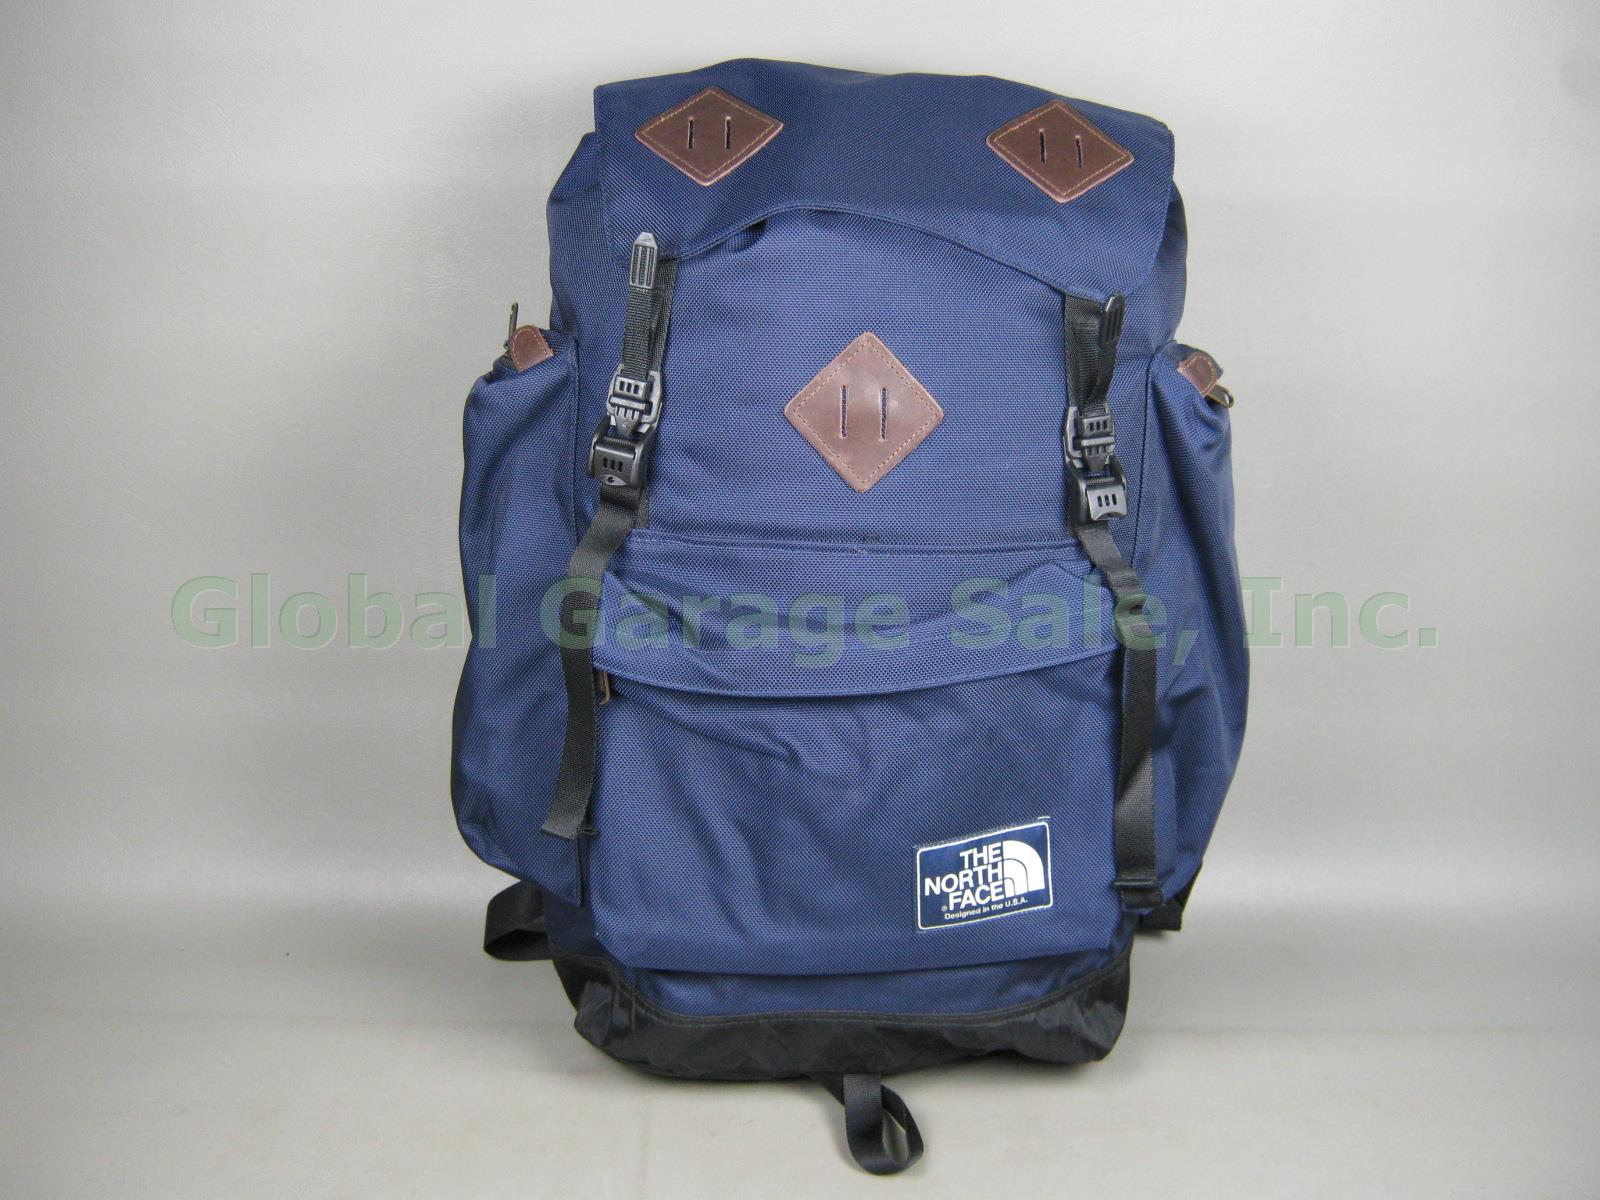 NEW NWOT The North Face Ruck Sack Backpack Daypack Nylon Leather Blue No reserve